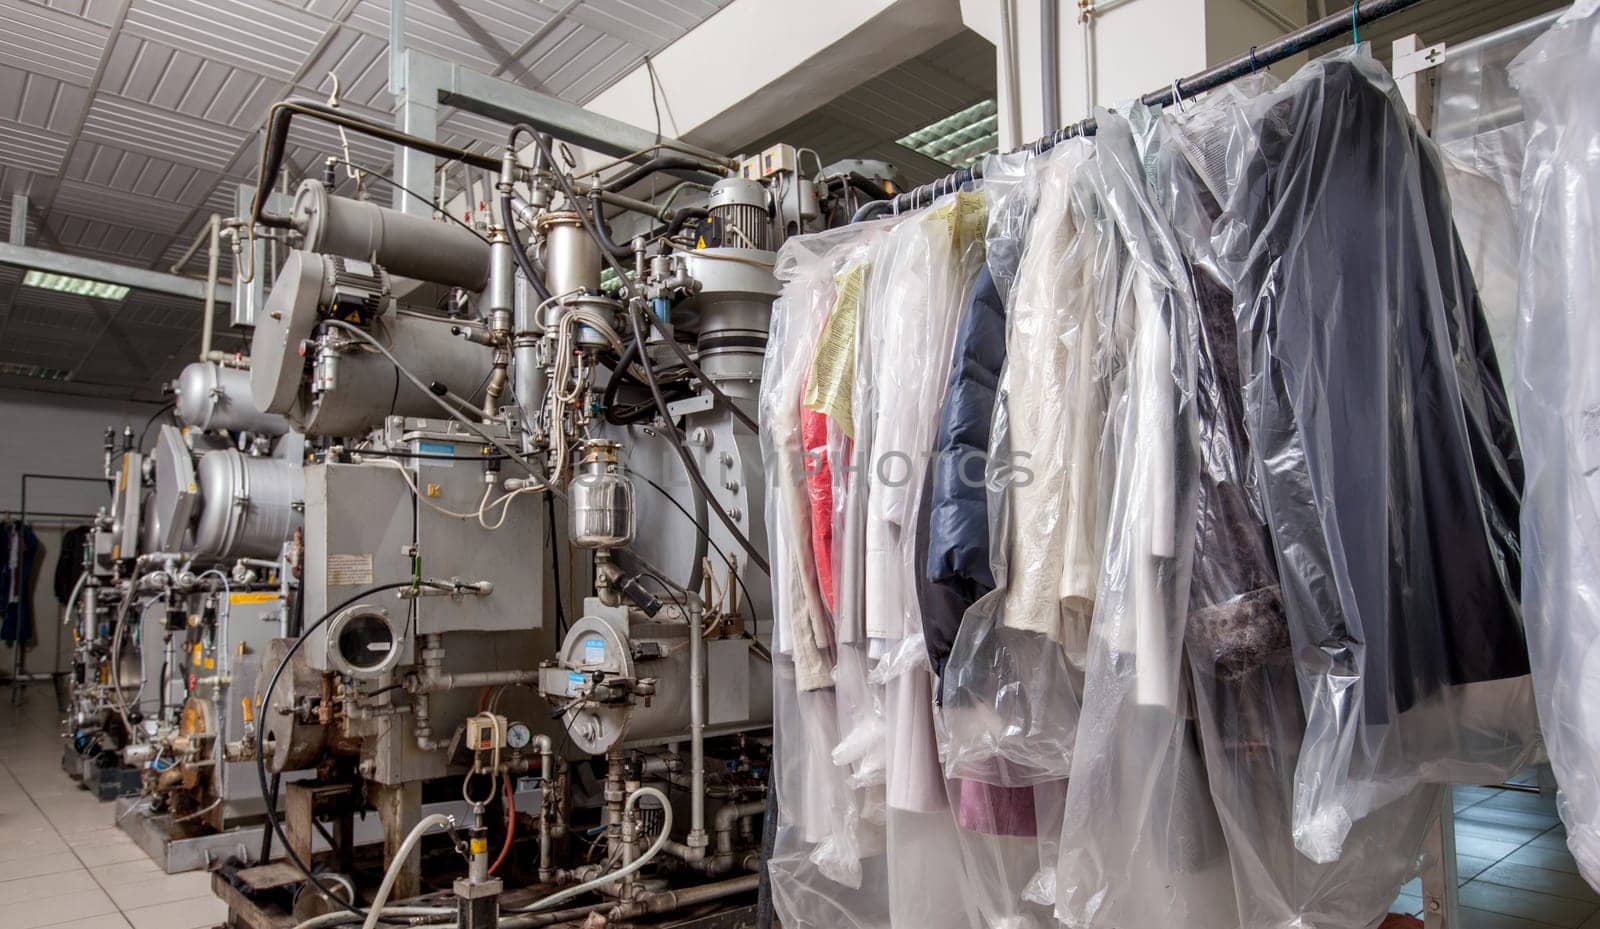 Dry Cleaning. Image of modern equipment and clothing on hangers